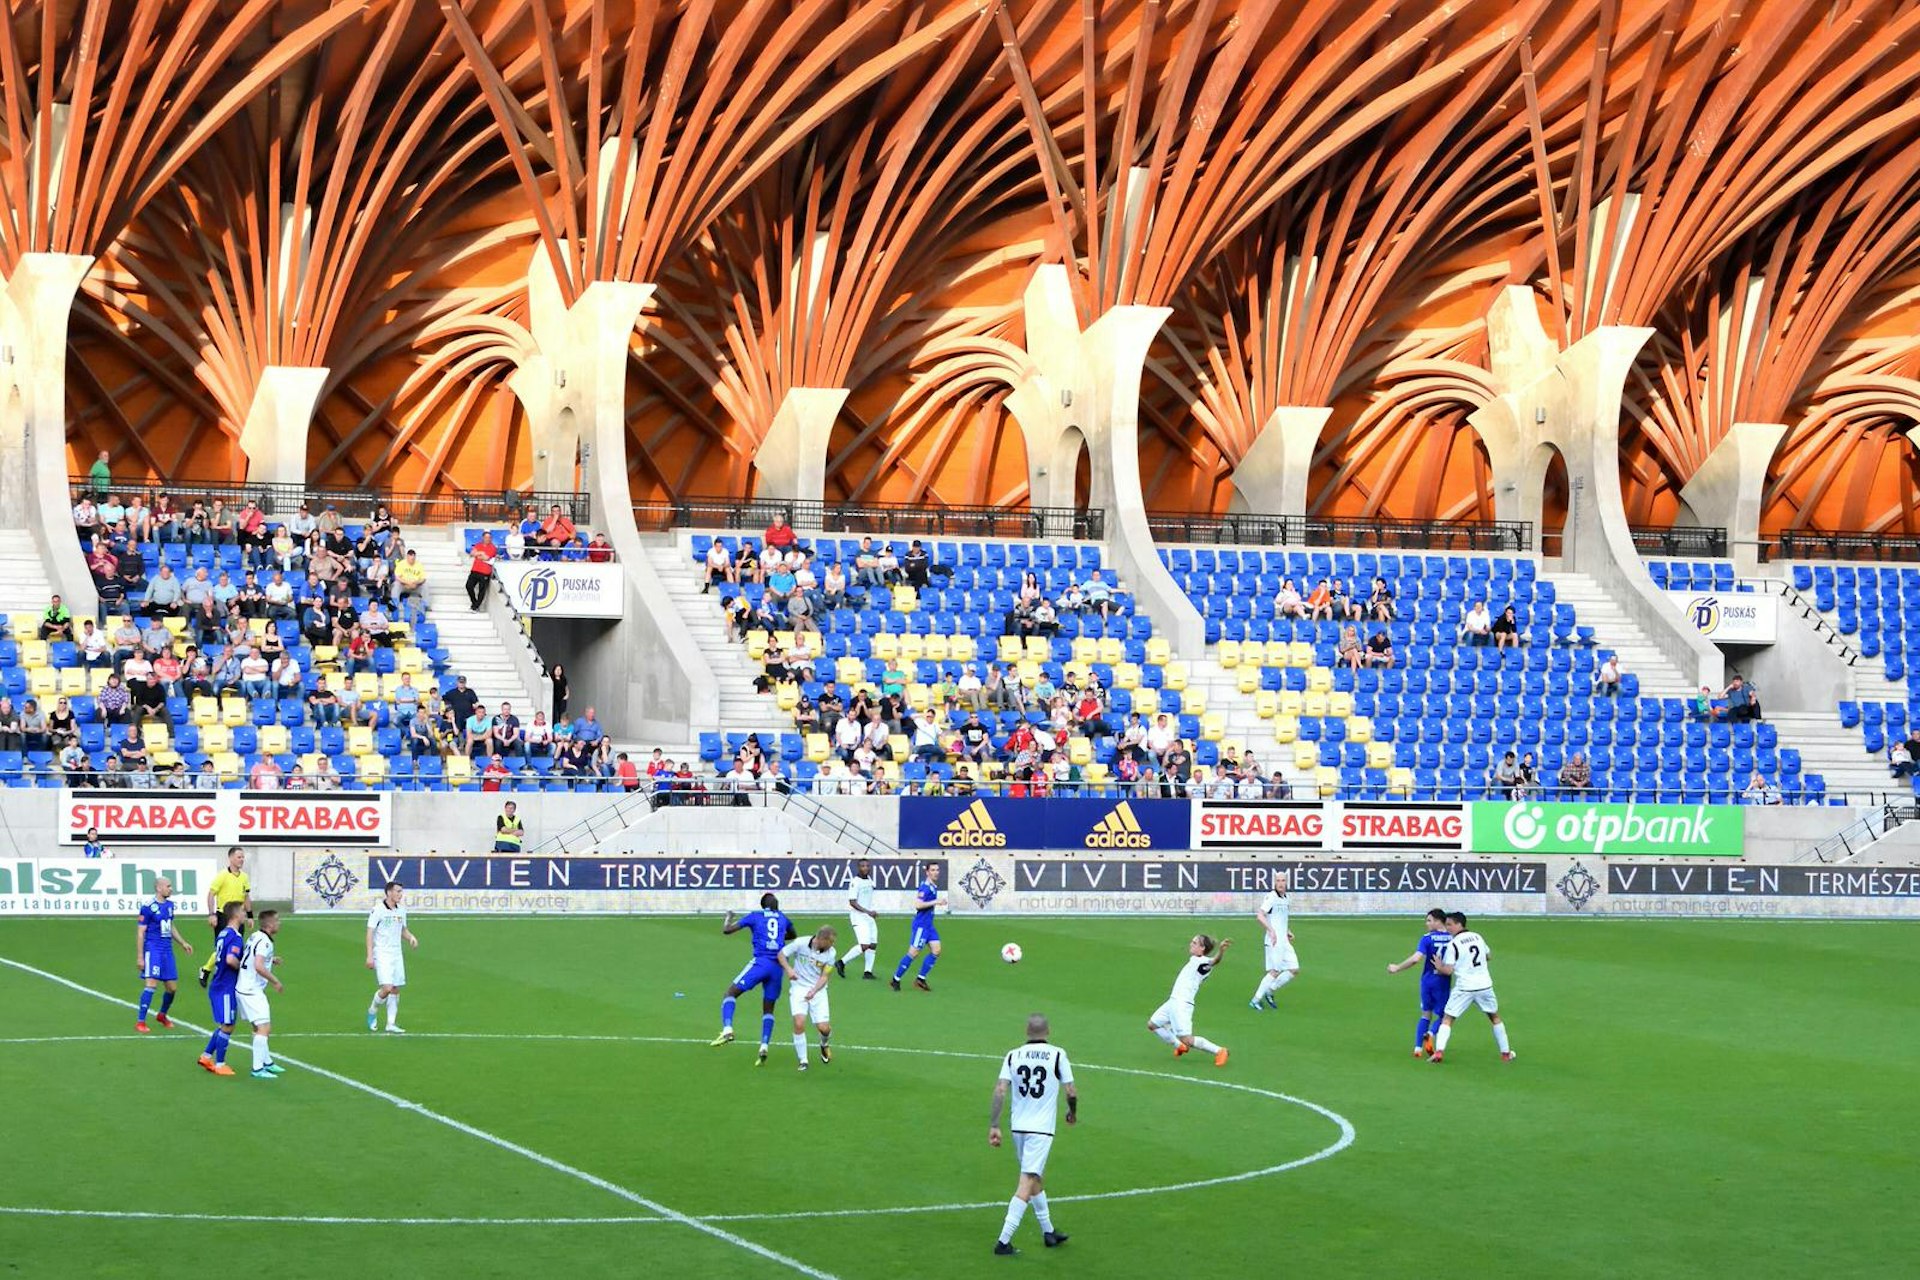 A football match in action at the Pancho Aréna. Beyond the pitch a stand of spectators is visible and above them is the sweeping, timber-beamed roof that makes the Pancho Aréna so distinctive.